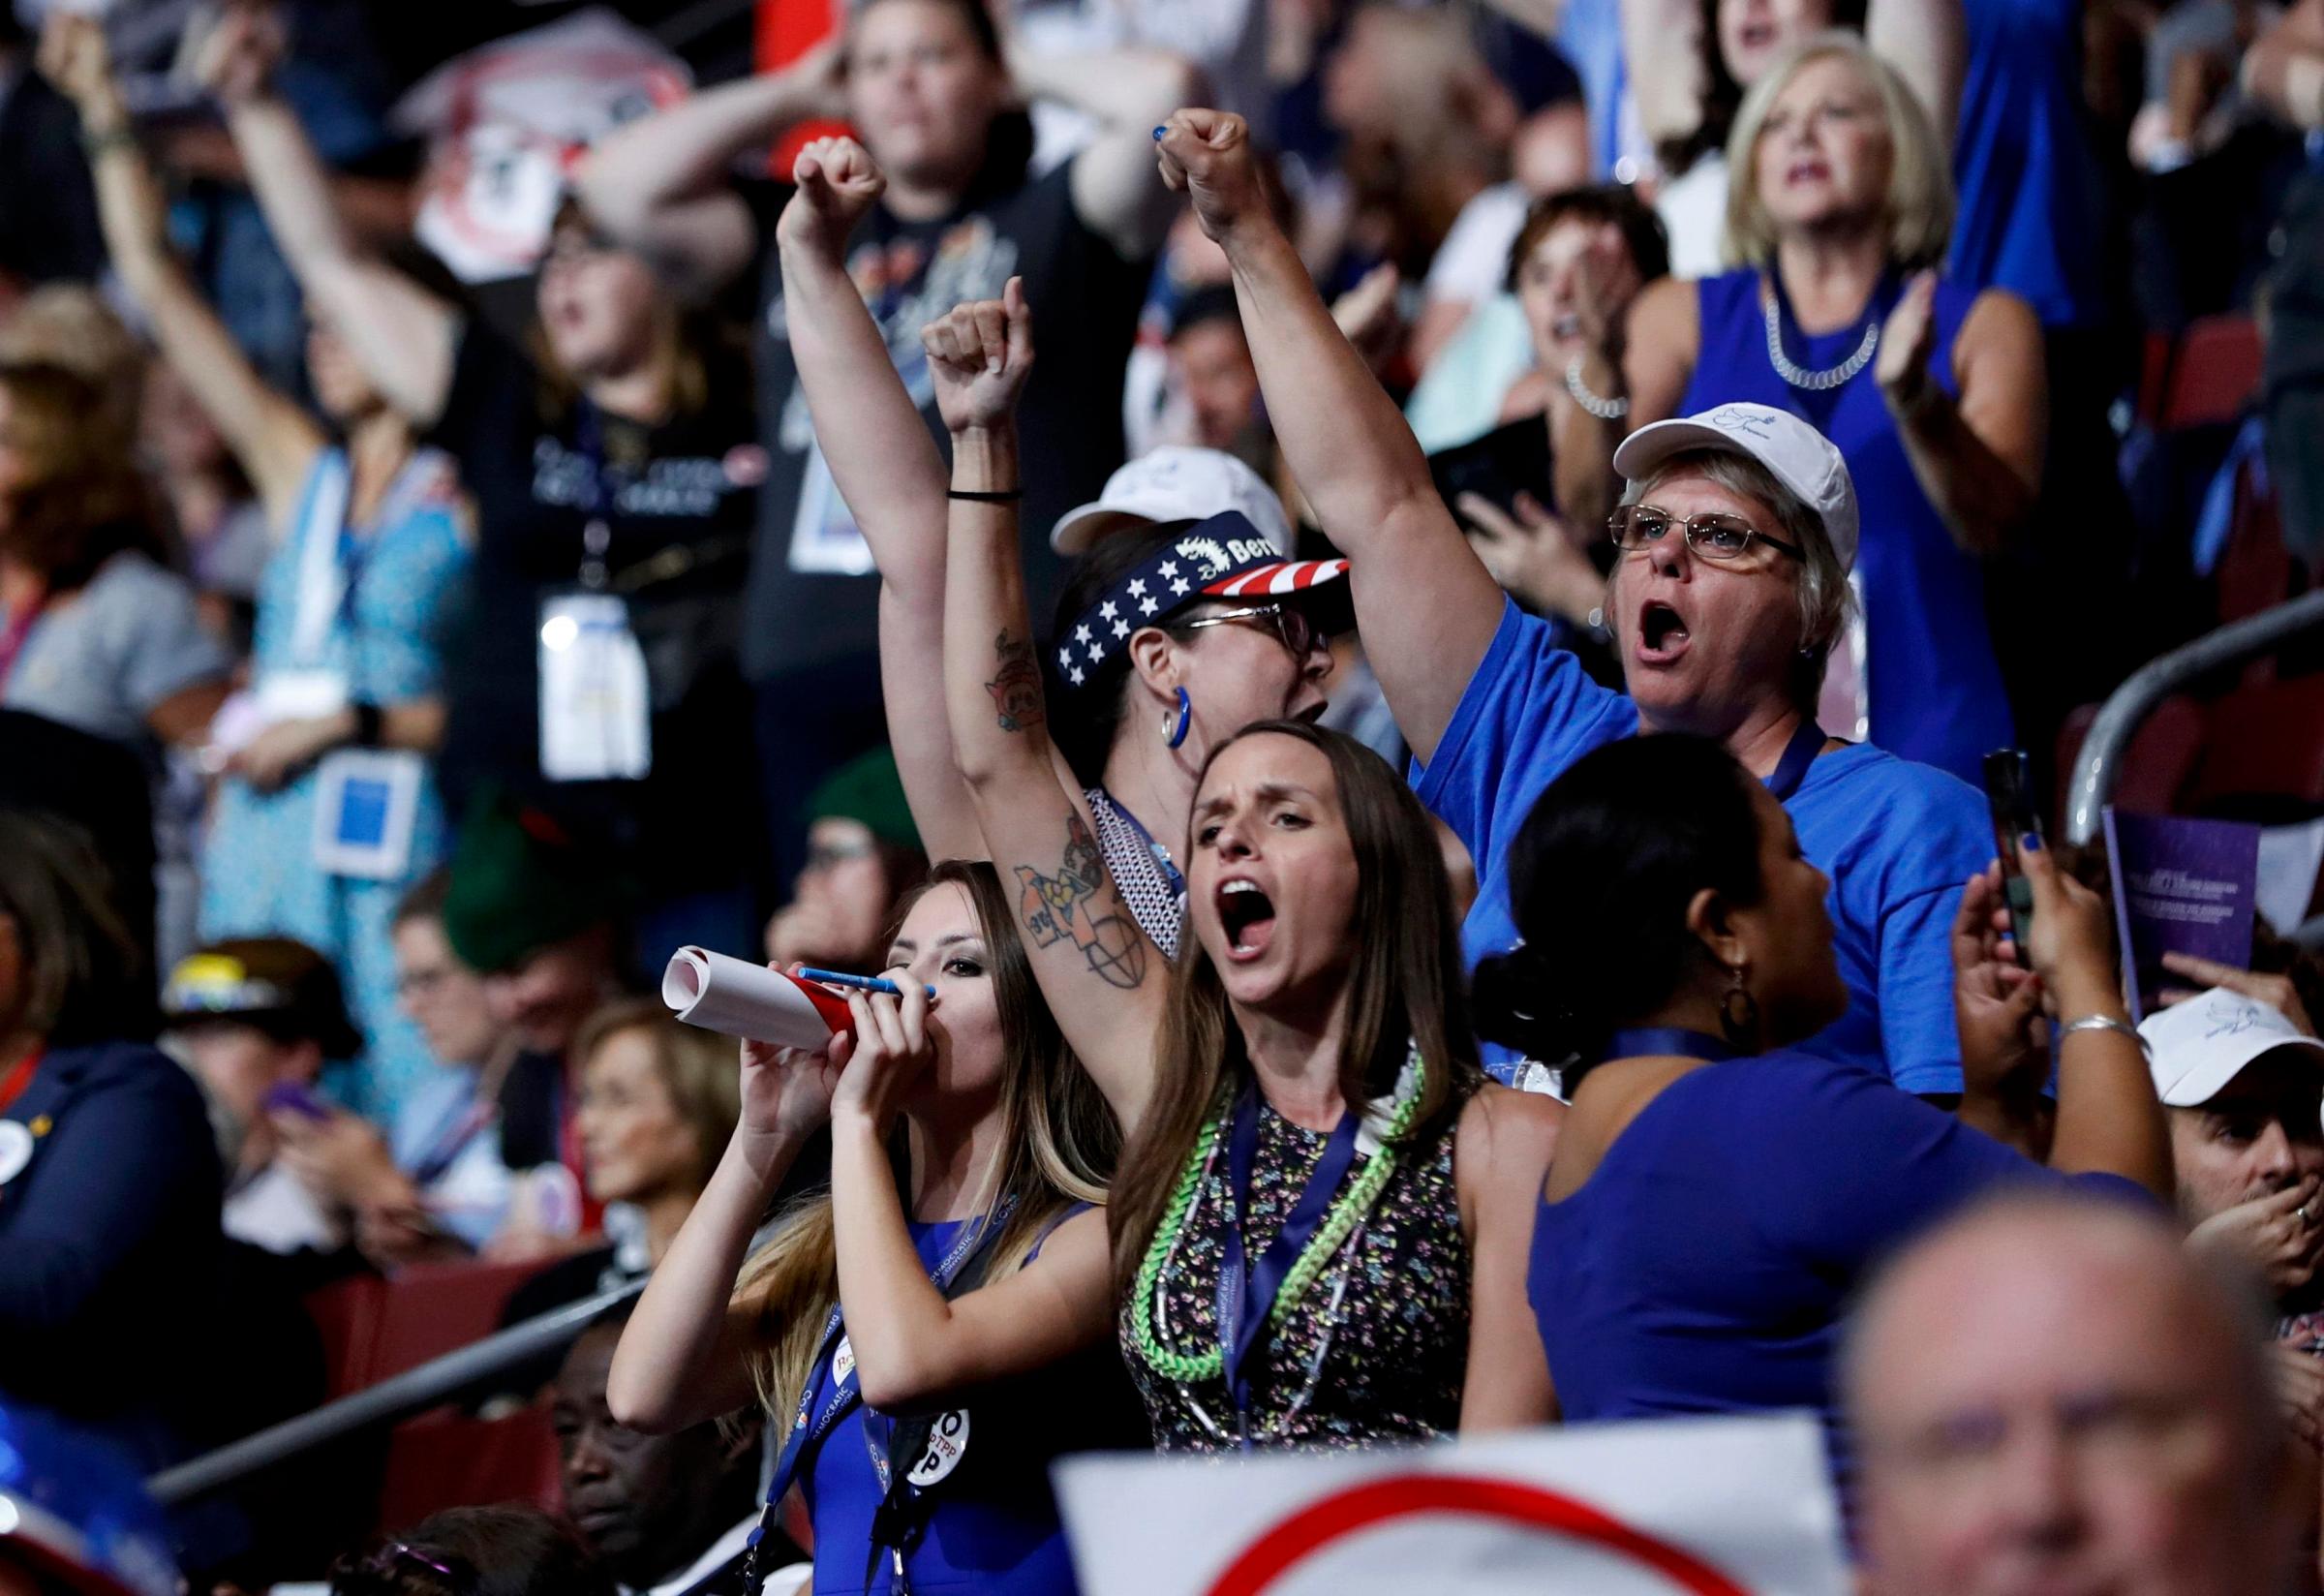 Supporters of Vermont Sen. Bernie Sanders chant his name as they protest on the floor during the first day of the Democratic National Convention in Philadelphia, on July 25, 2016.